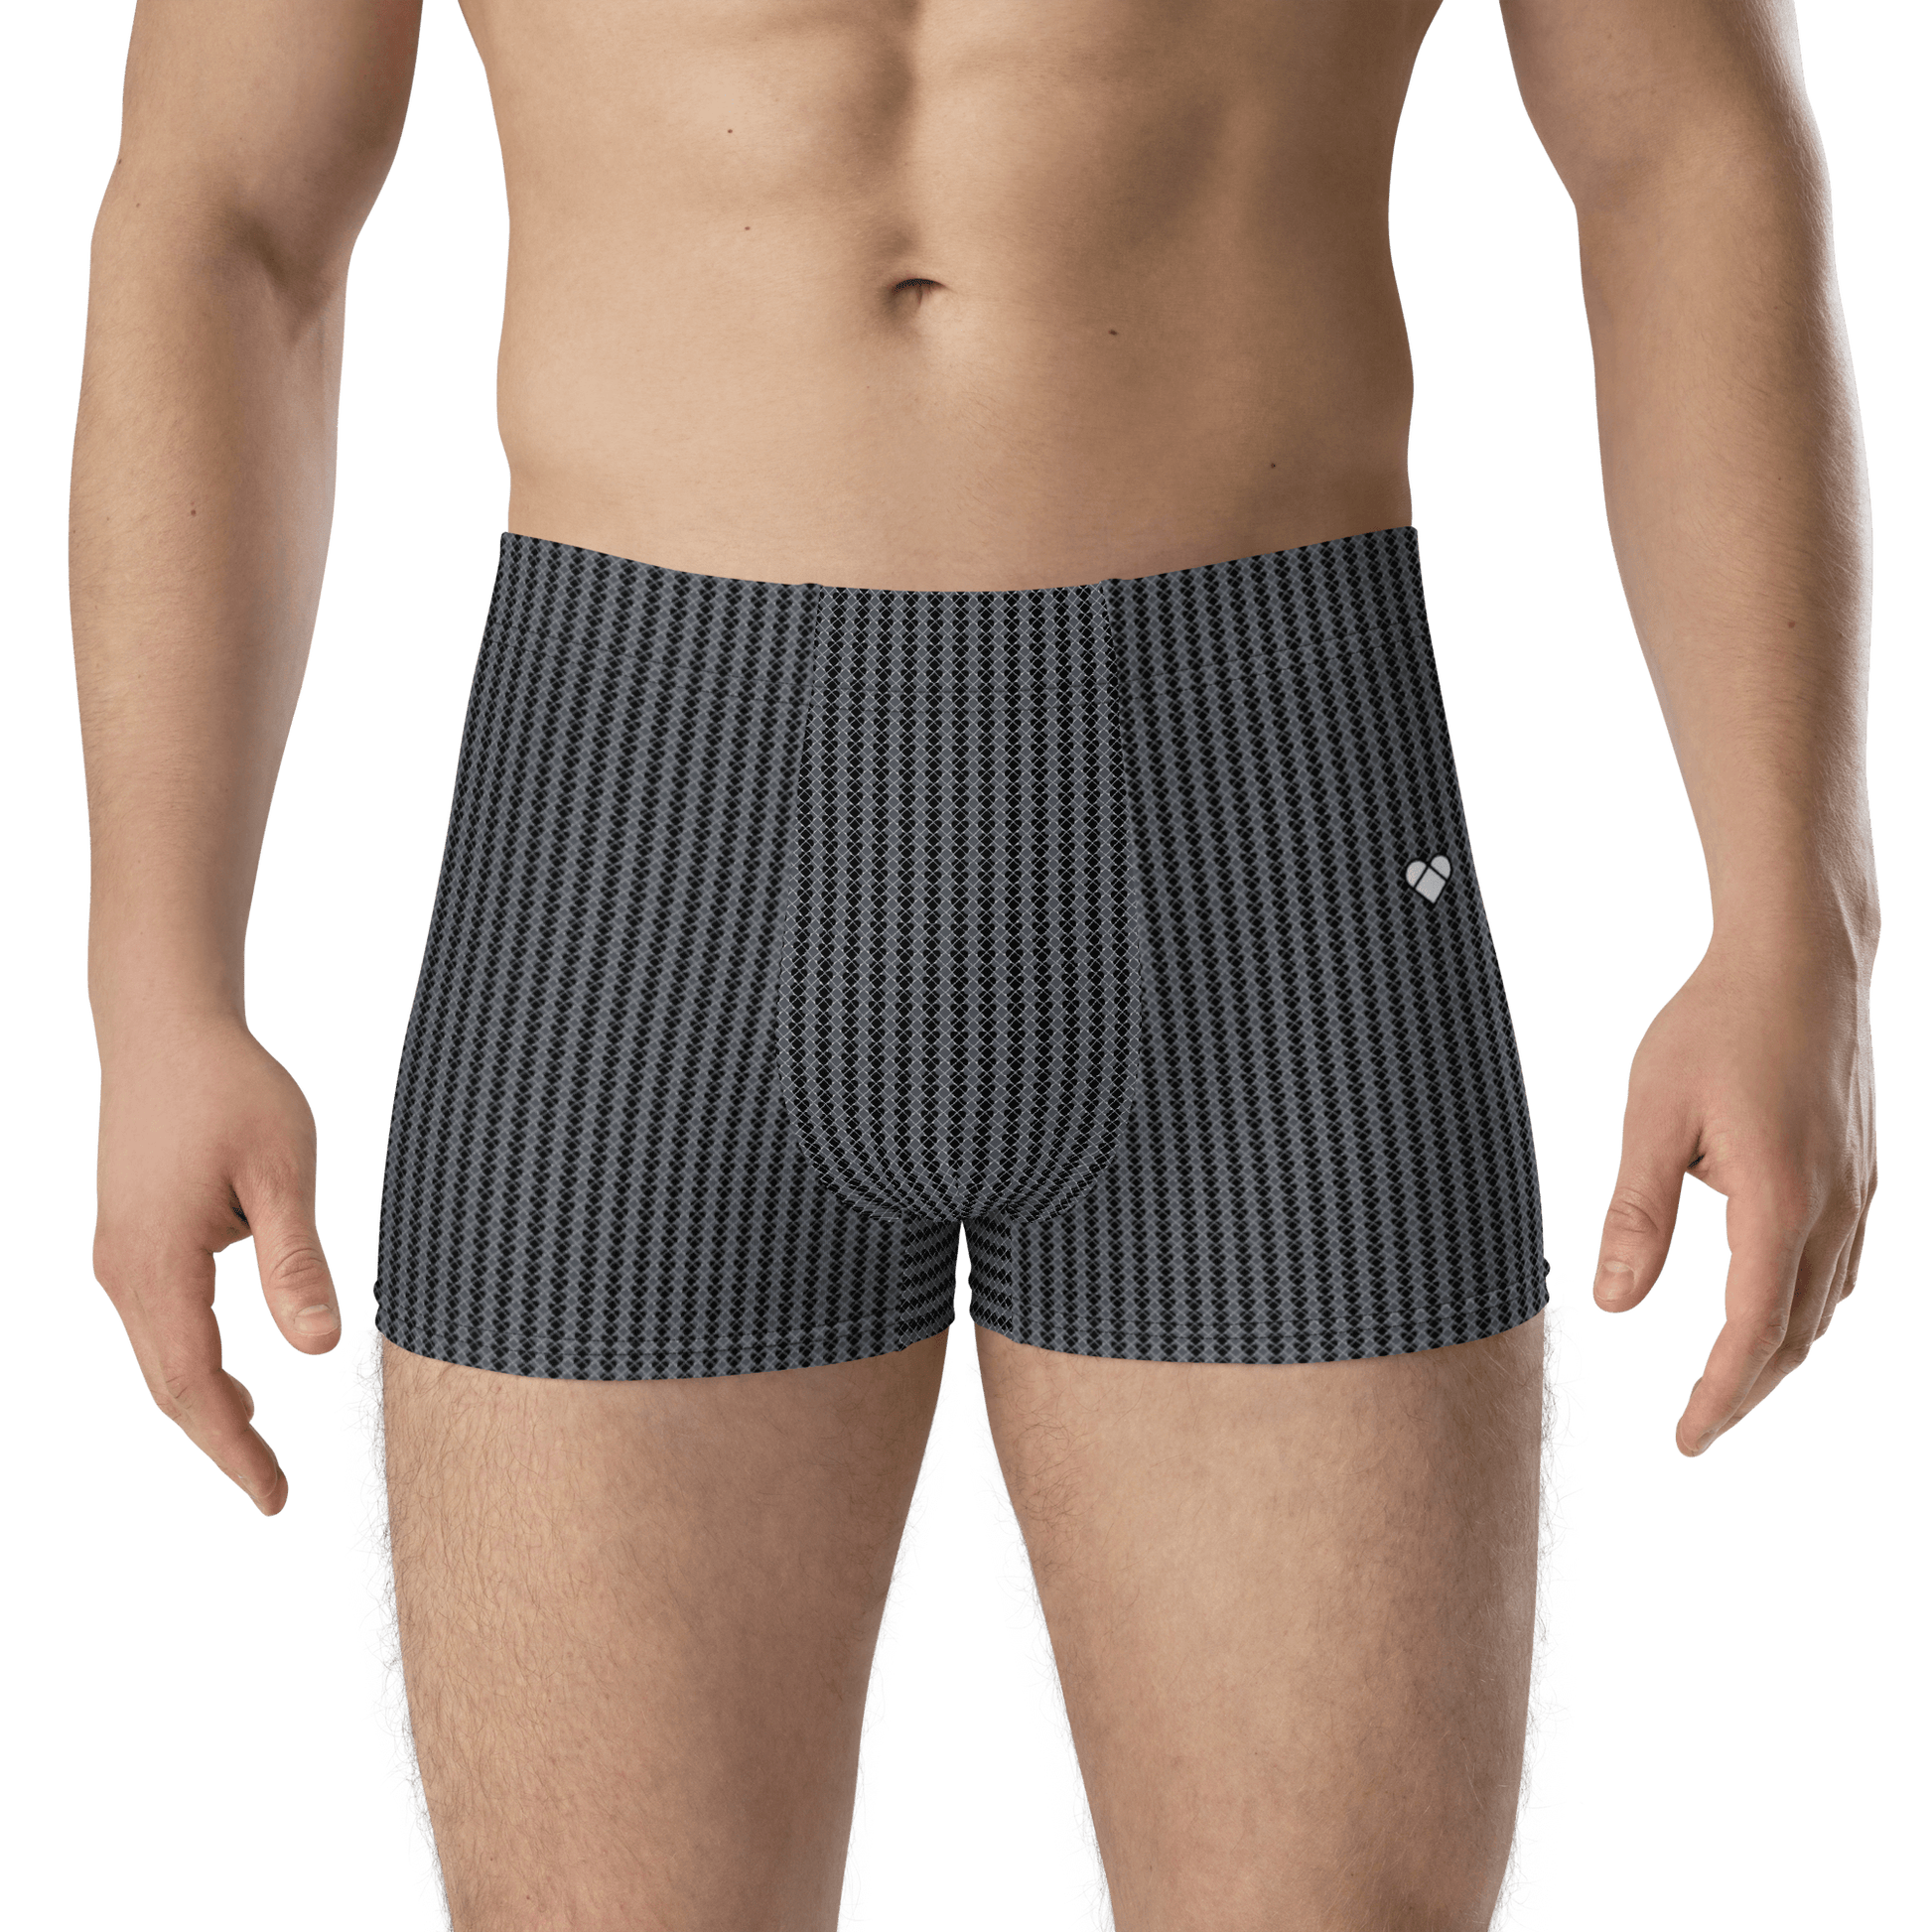 Lovogram Boxer Briefs: Geometric hearts in stylish grays, adorned with a big white logo heart